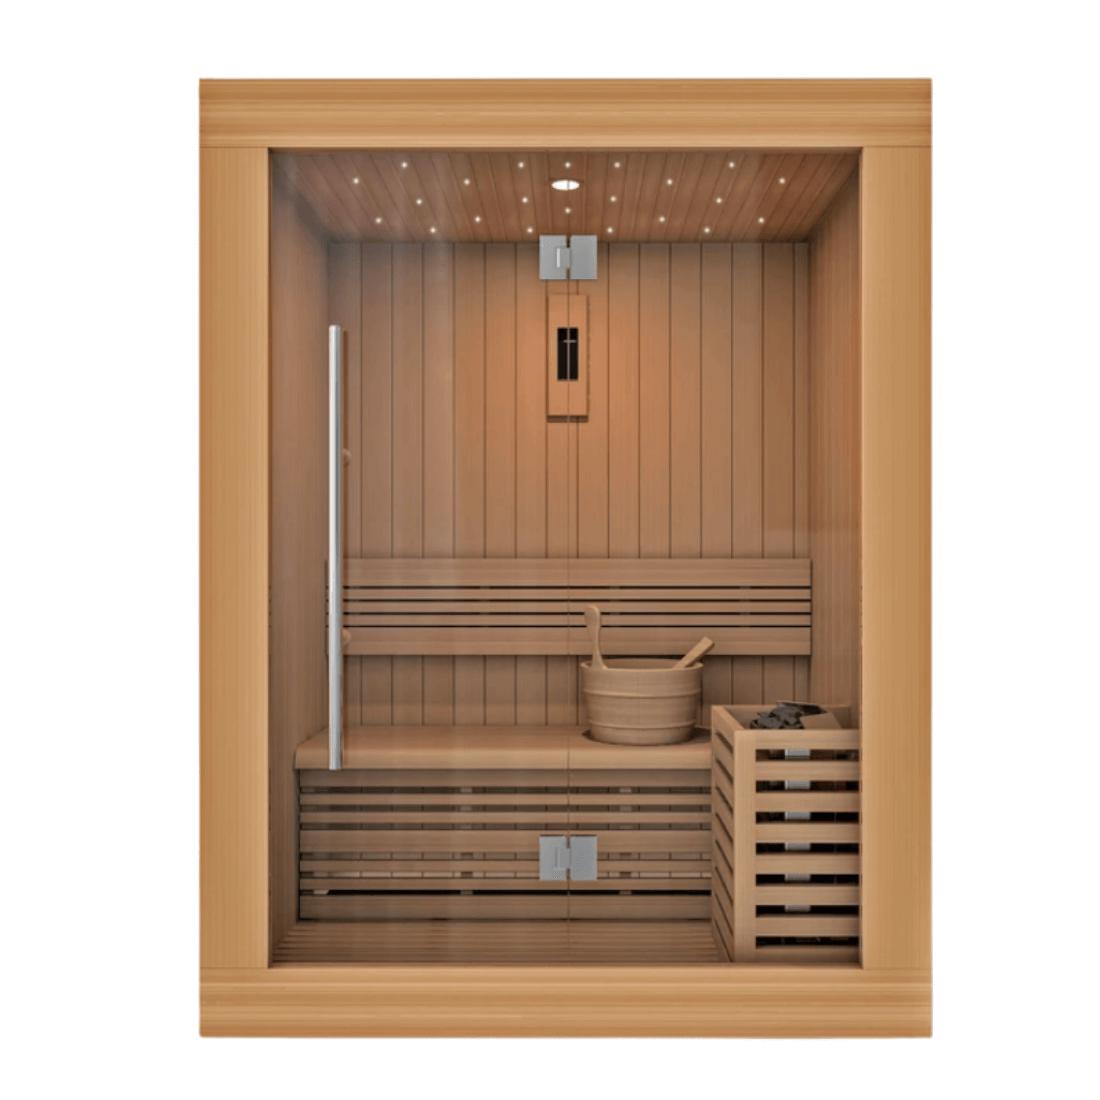 Golden Designs "Sundsvall Edition" 2-Person Traditional Steam Sauna - Canadian Red Cedar, GDI-7289-01 front view spacing.